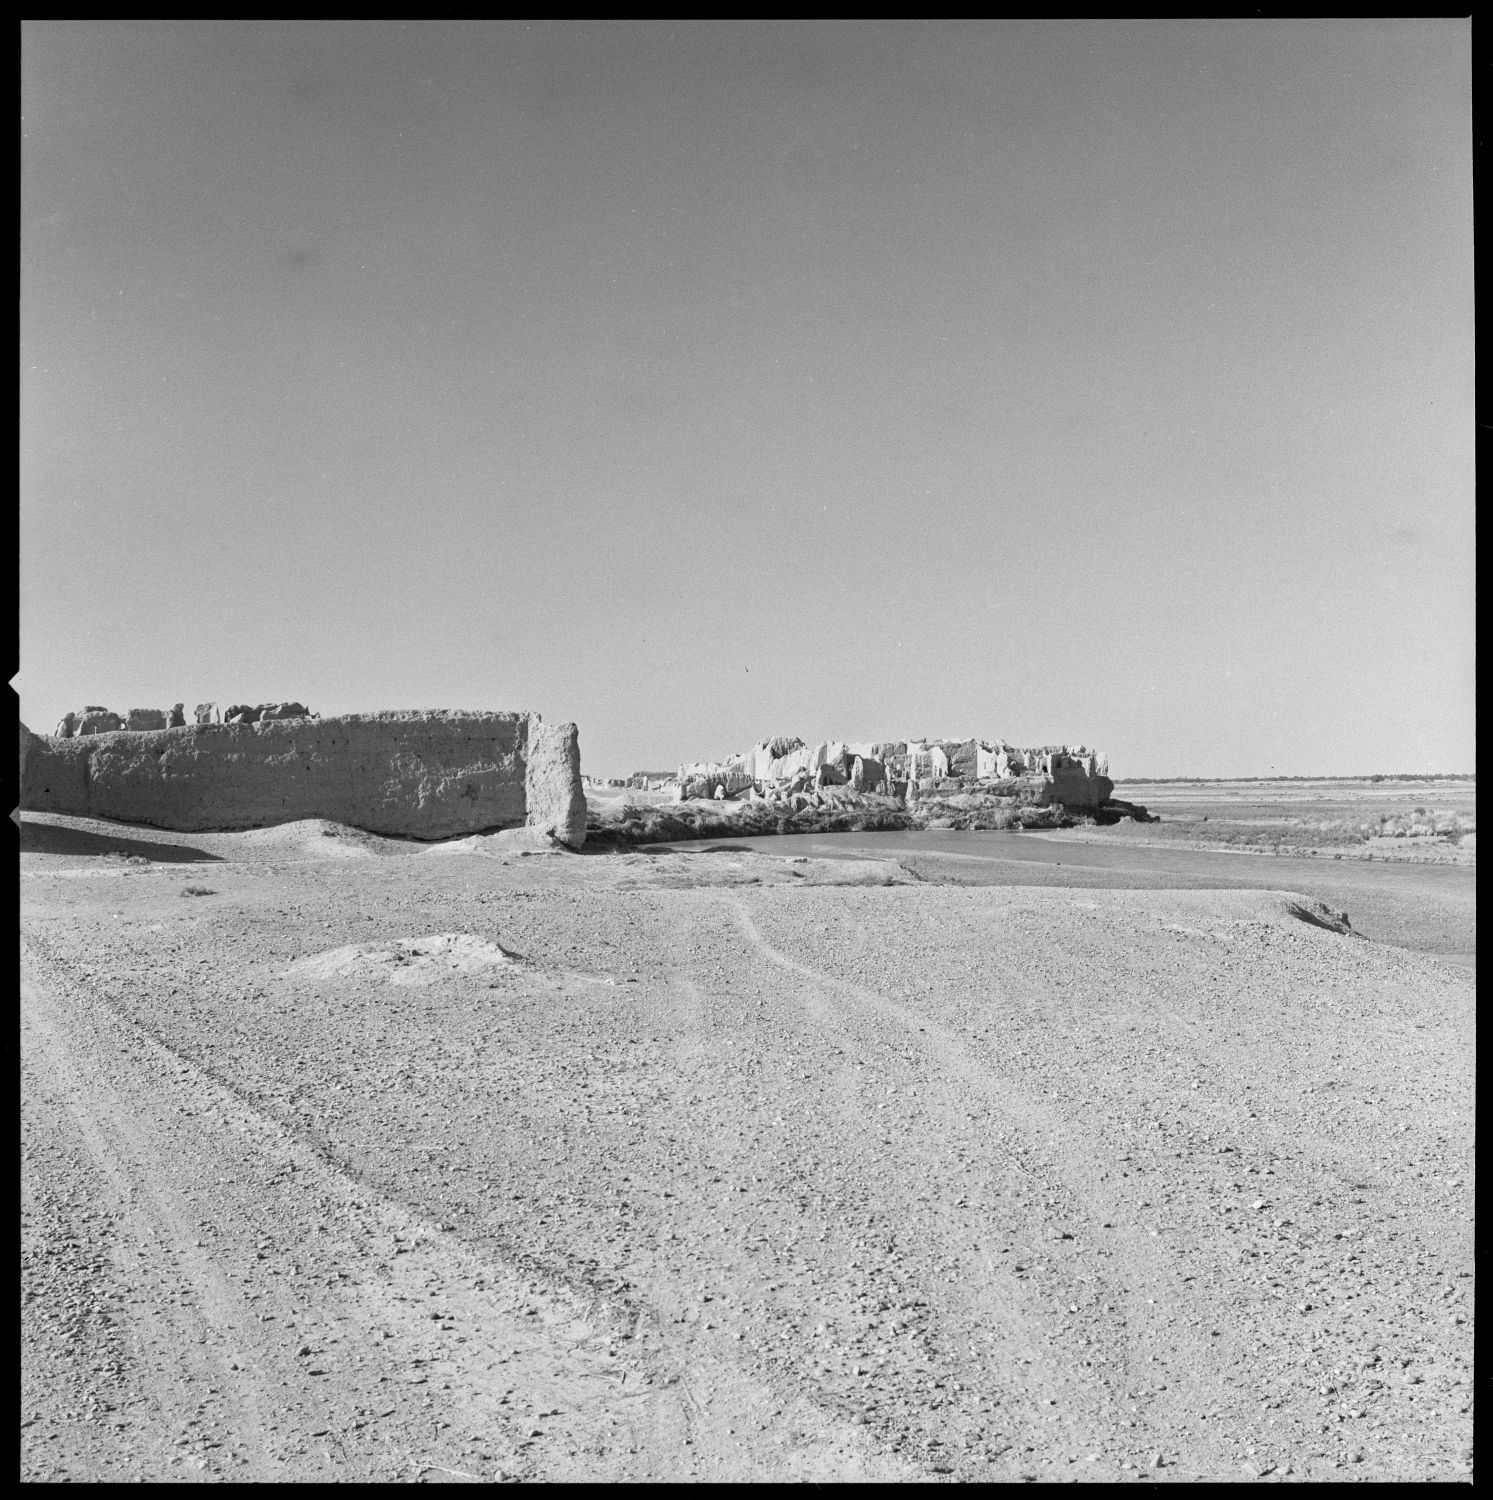 View of ruins at Lashkar-i Bazar, facing south along the Helmand. The so-called "Central Palace" is visible in foreground, and the "South Palace" is visible in background.